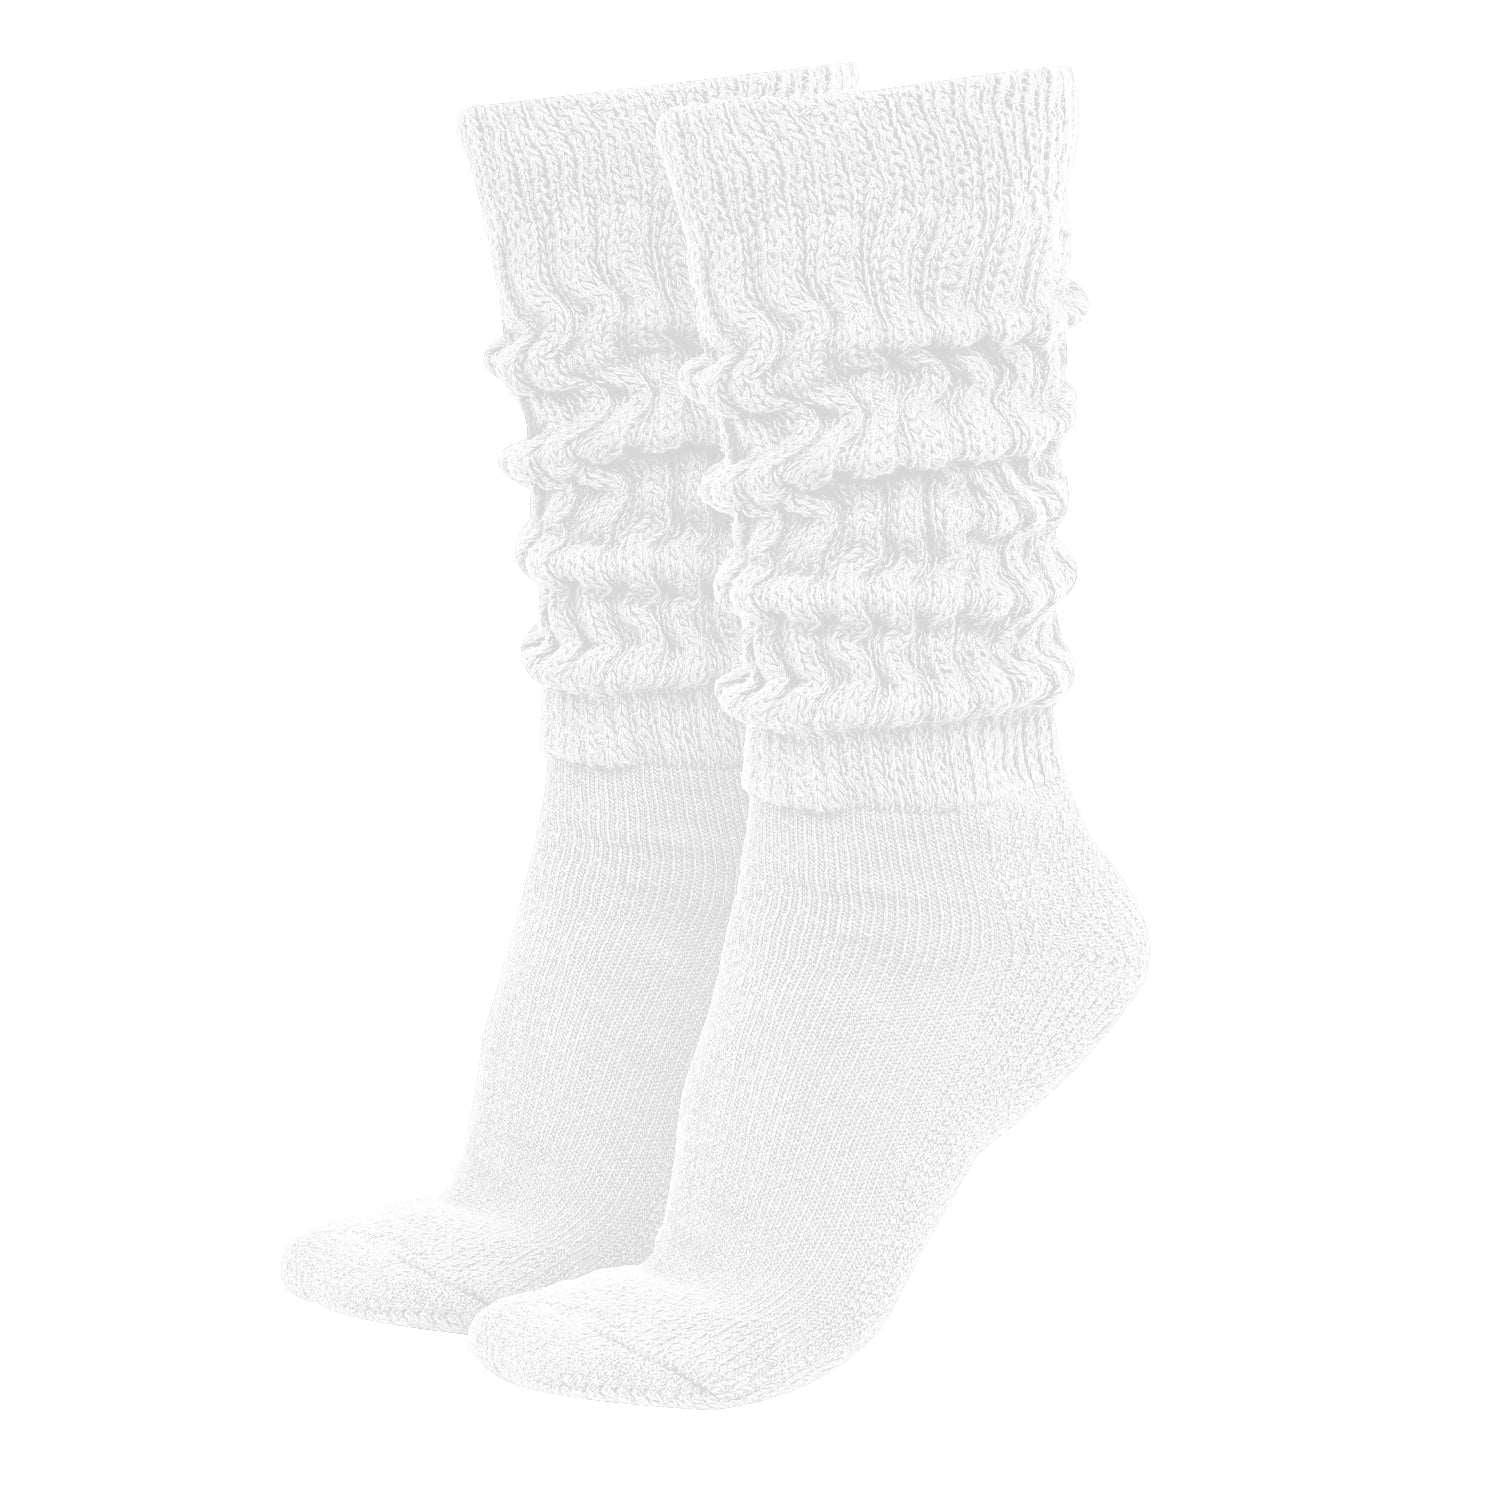 MDR Distirbutors Women's Extra Long & Heavy Slouch Cotton Wear at any Length Socks Made in USA 1 Pair Size 9 to 11